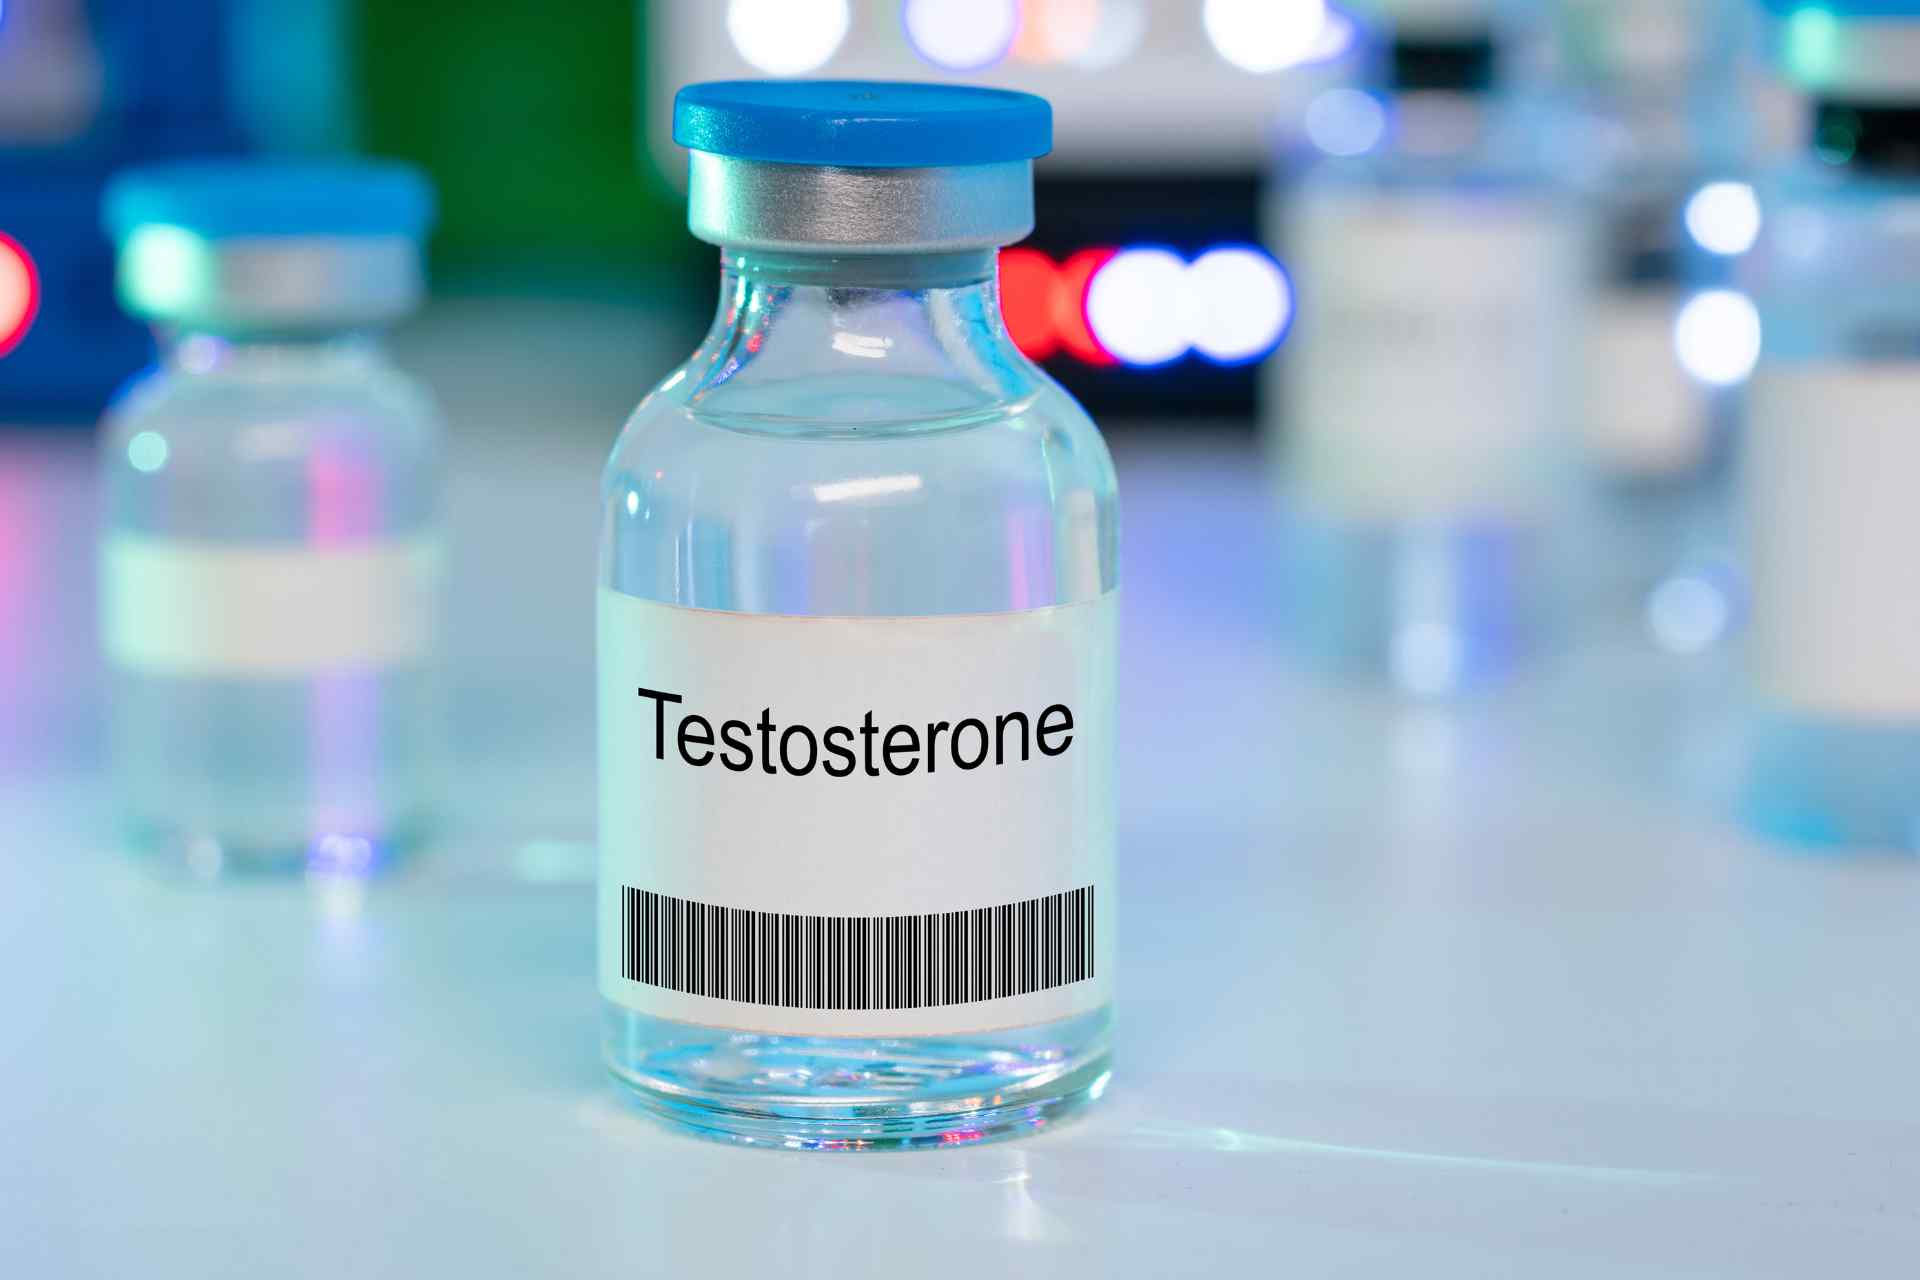 Testosterone and Its Function